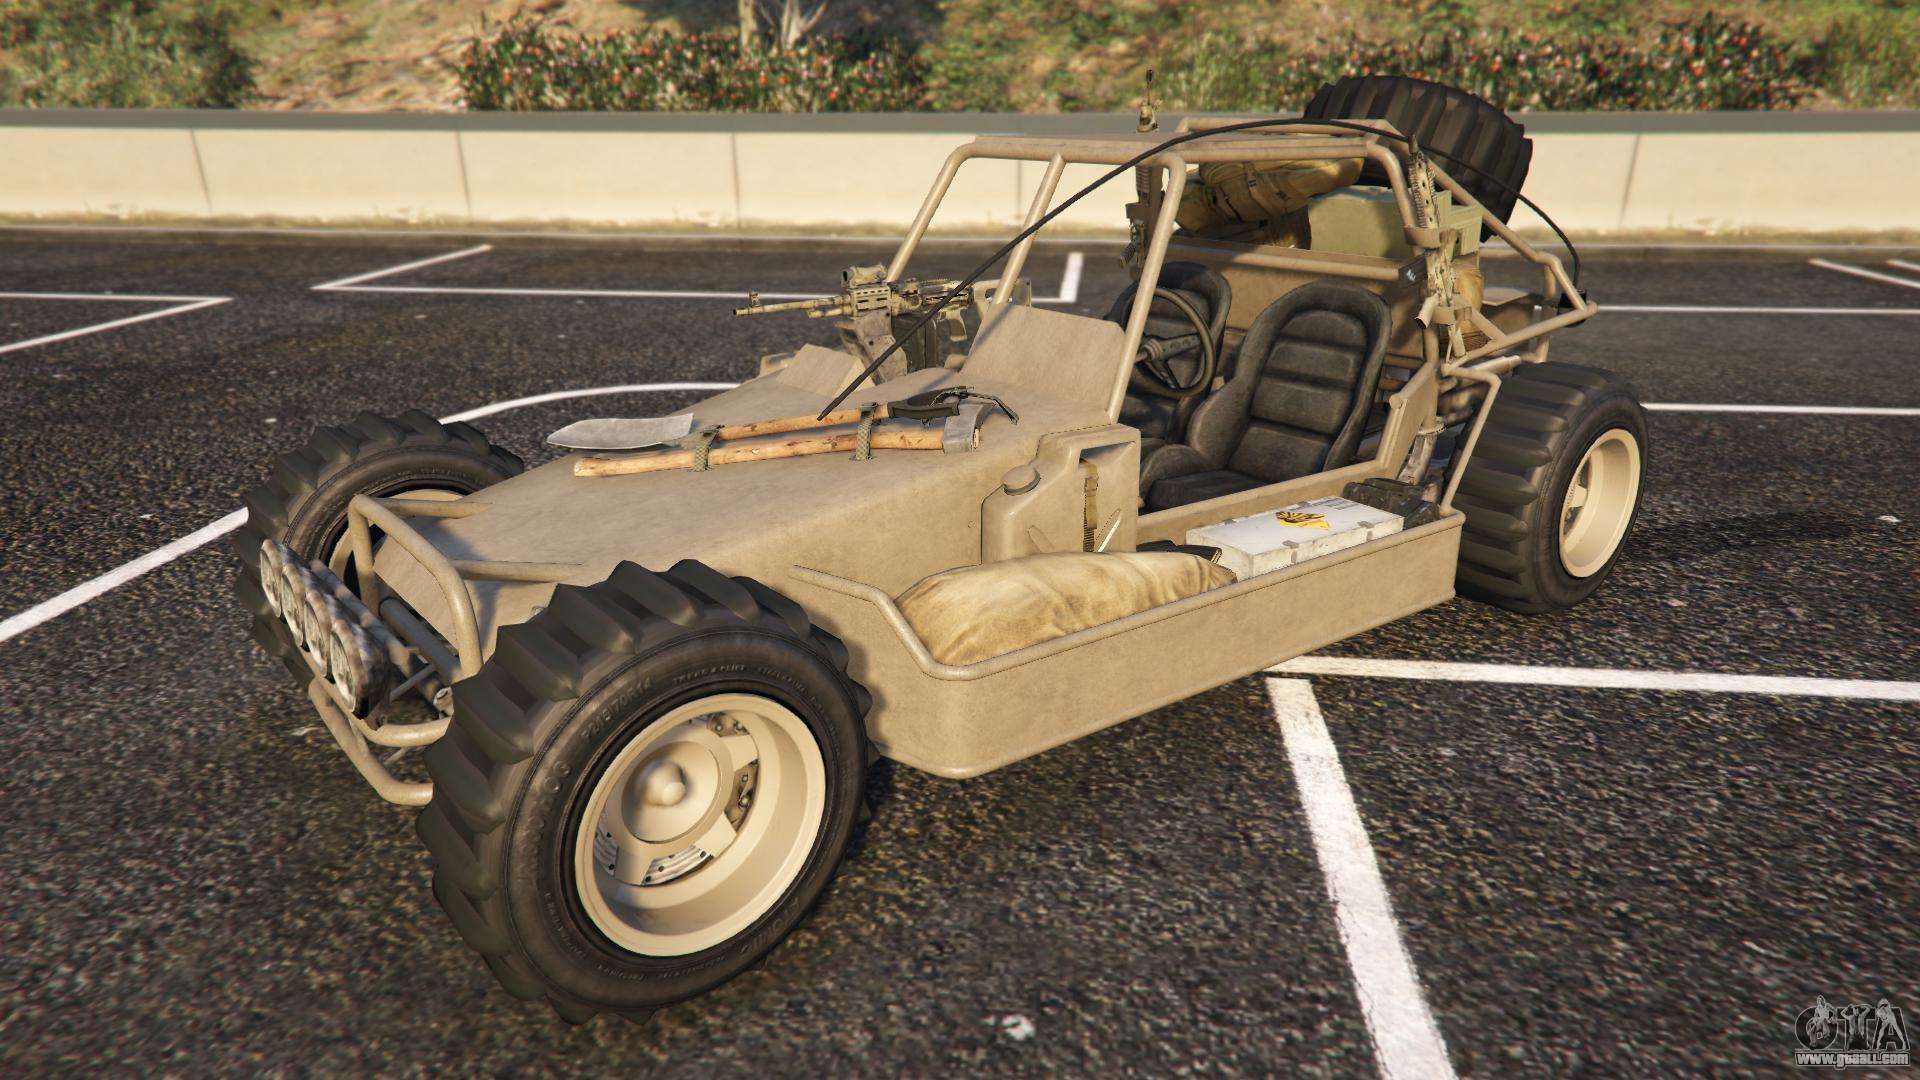 Dune FAV from the GTA 5 front view